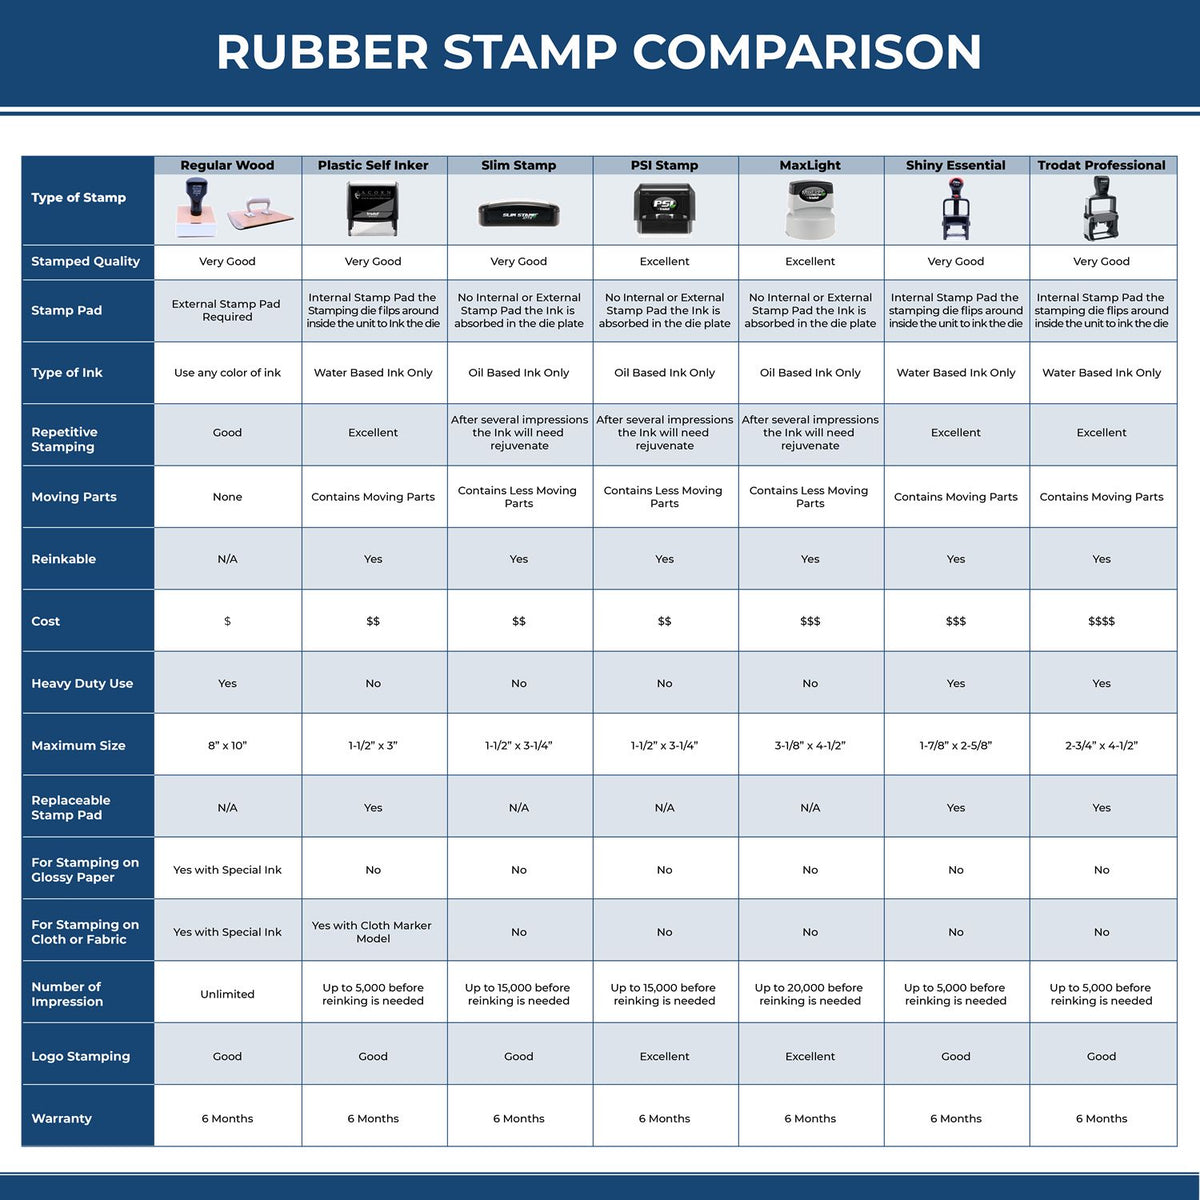 Large Self-Inking Bold Rough Draft Stamp 5662S Rubber Stamp Comparison